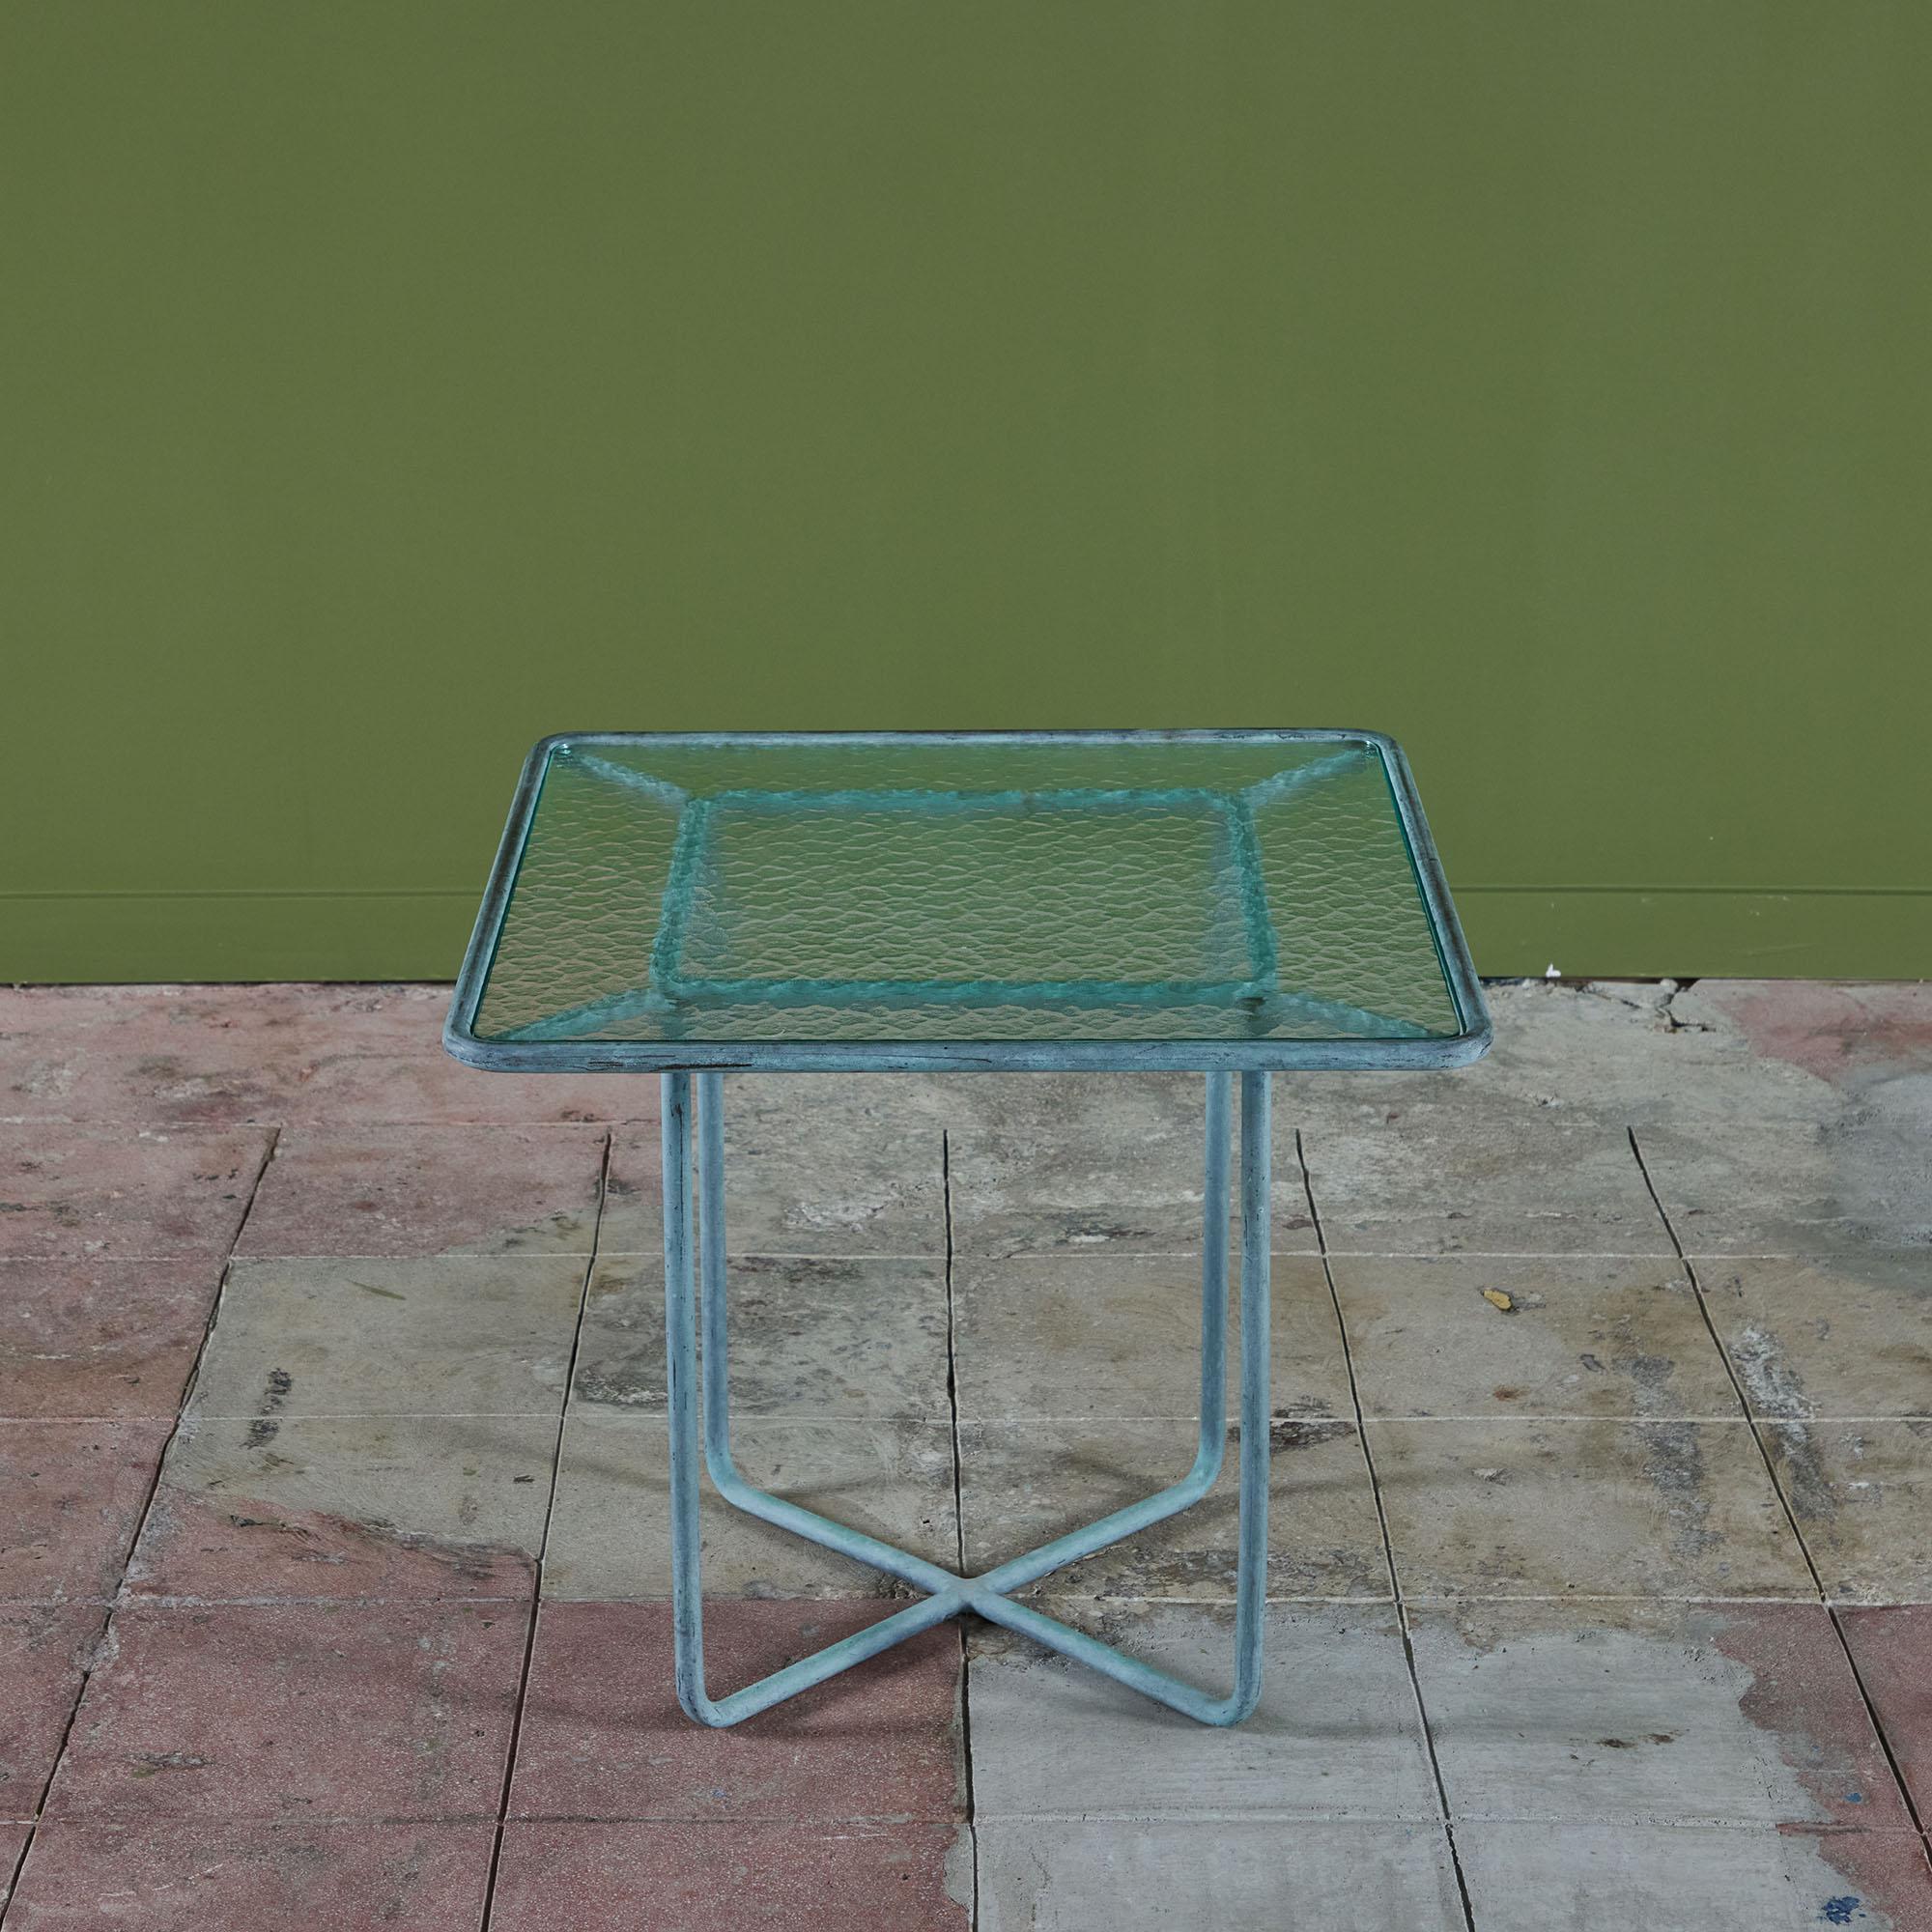 A side table in patinated bronze designed by Walter Lamb and produced by Brown Jordan. The table has a square shape with rounded corners, supported by four legs in matching bronze. The legs intersect with horizontal bars that sit on the ground for